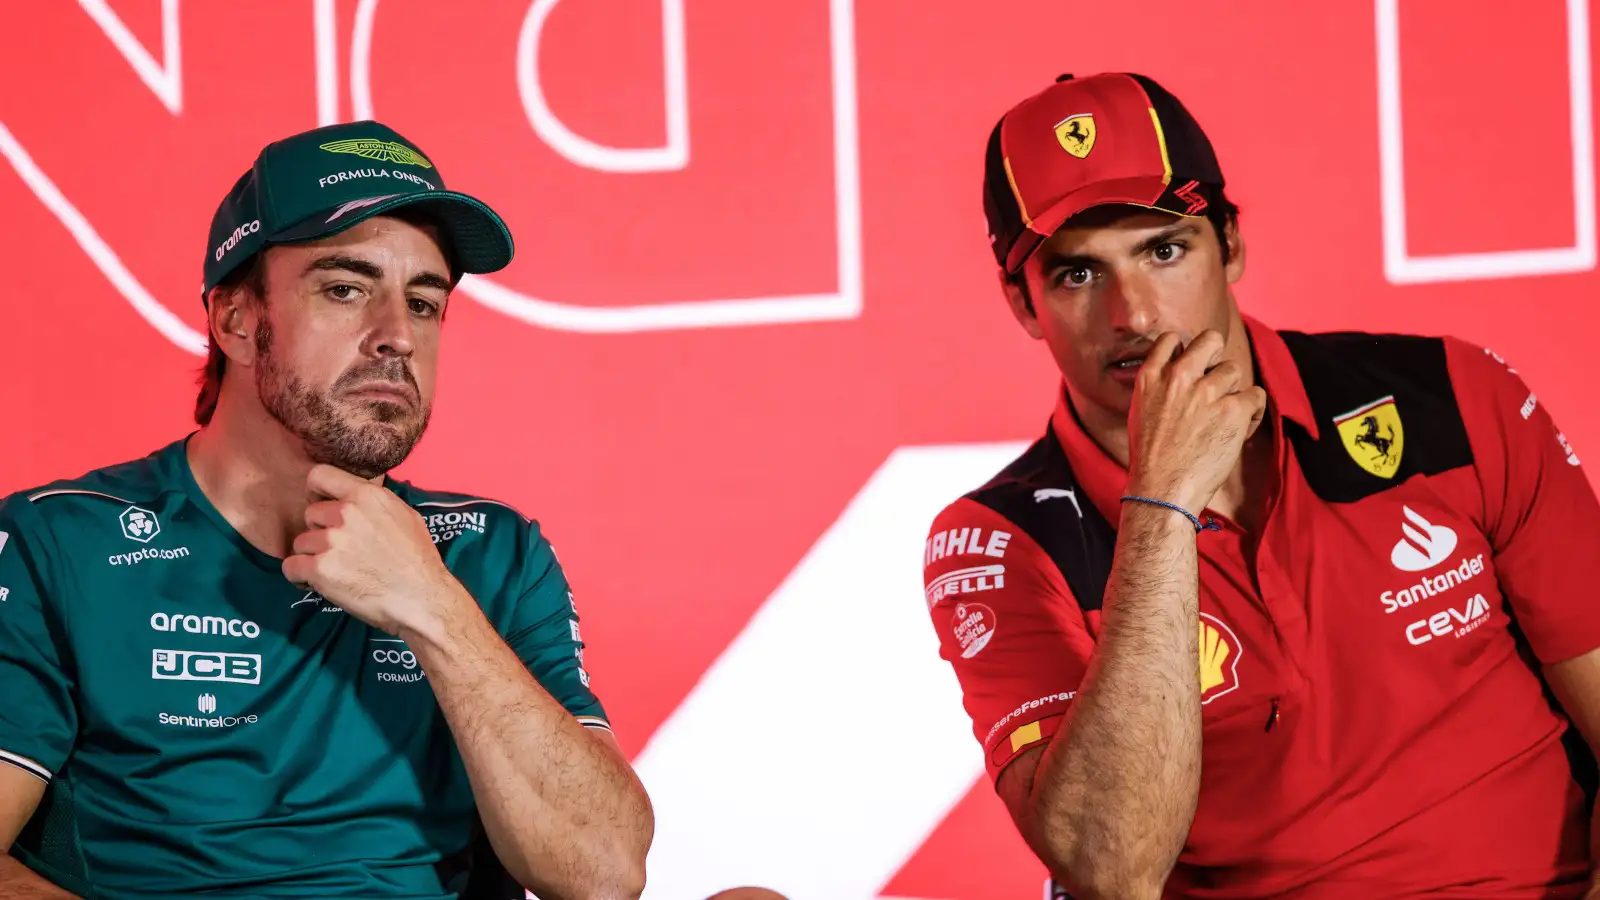 Fernando Alonso and Carlos Sainz speaking in a press conference. Bahrain February 2023